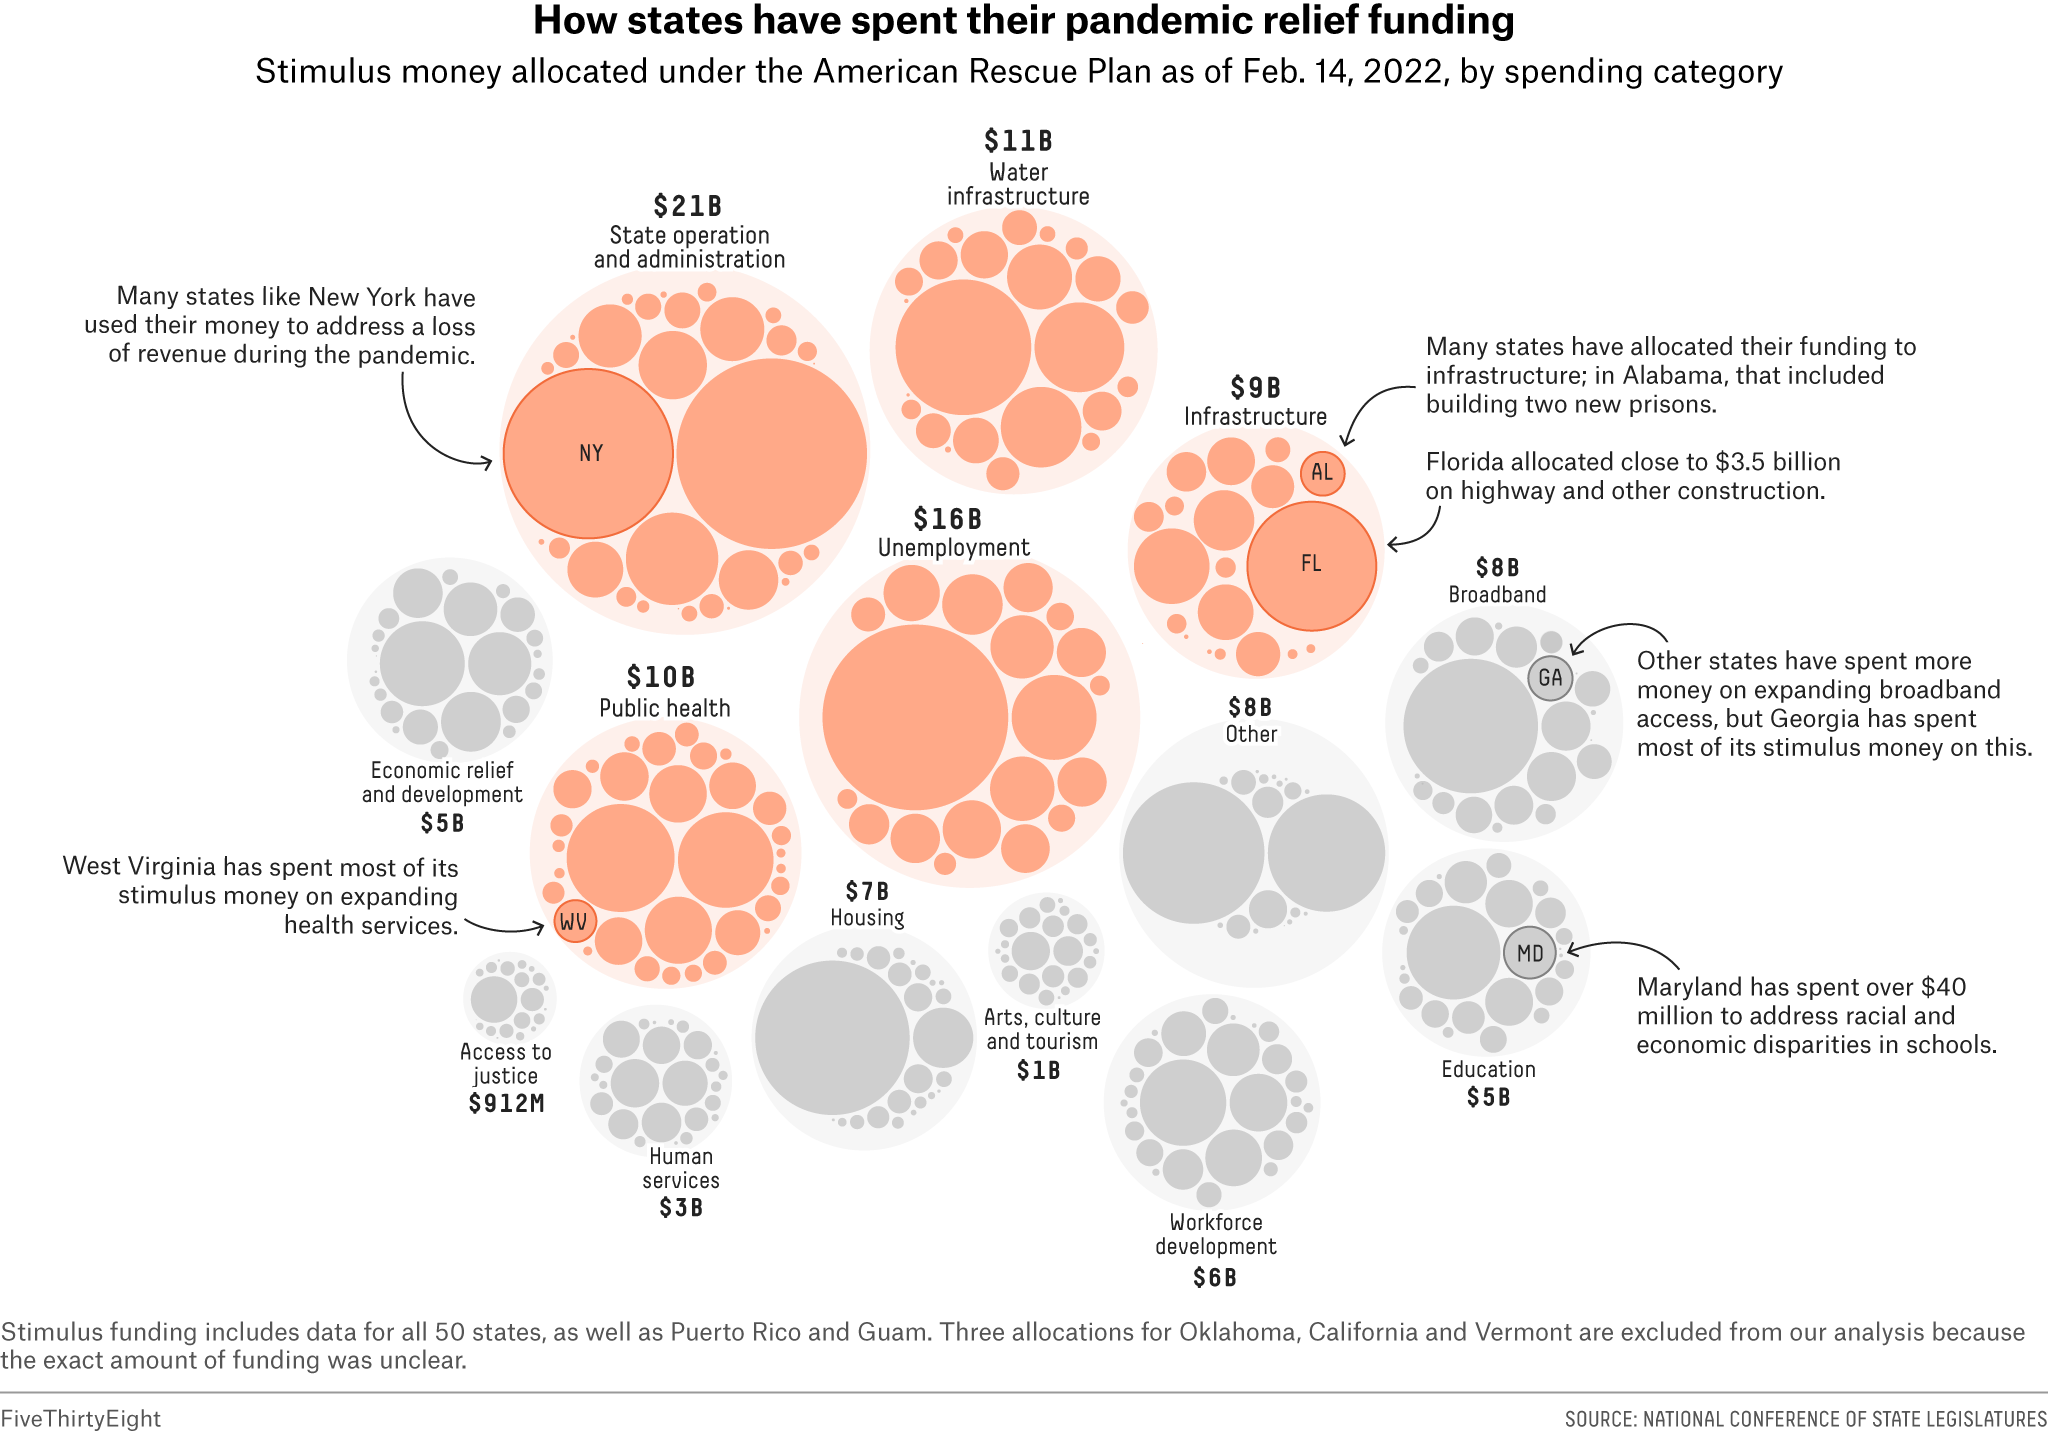 Circle packing charts show how states have spent pandemic relief funding. Most directed money to state operation and administration, unemployment, infrastructure and public health. 